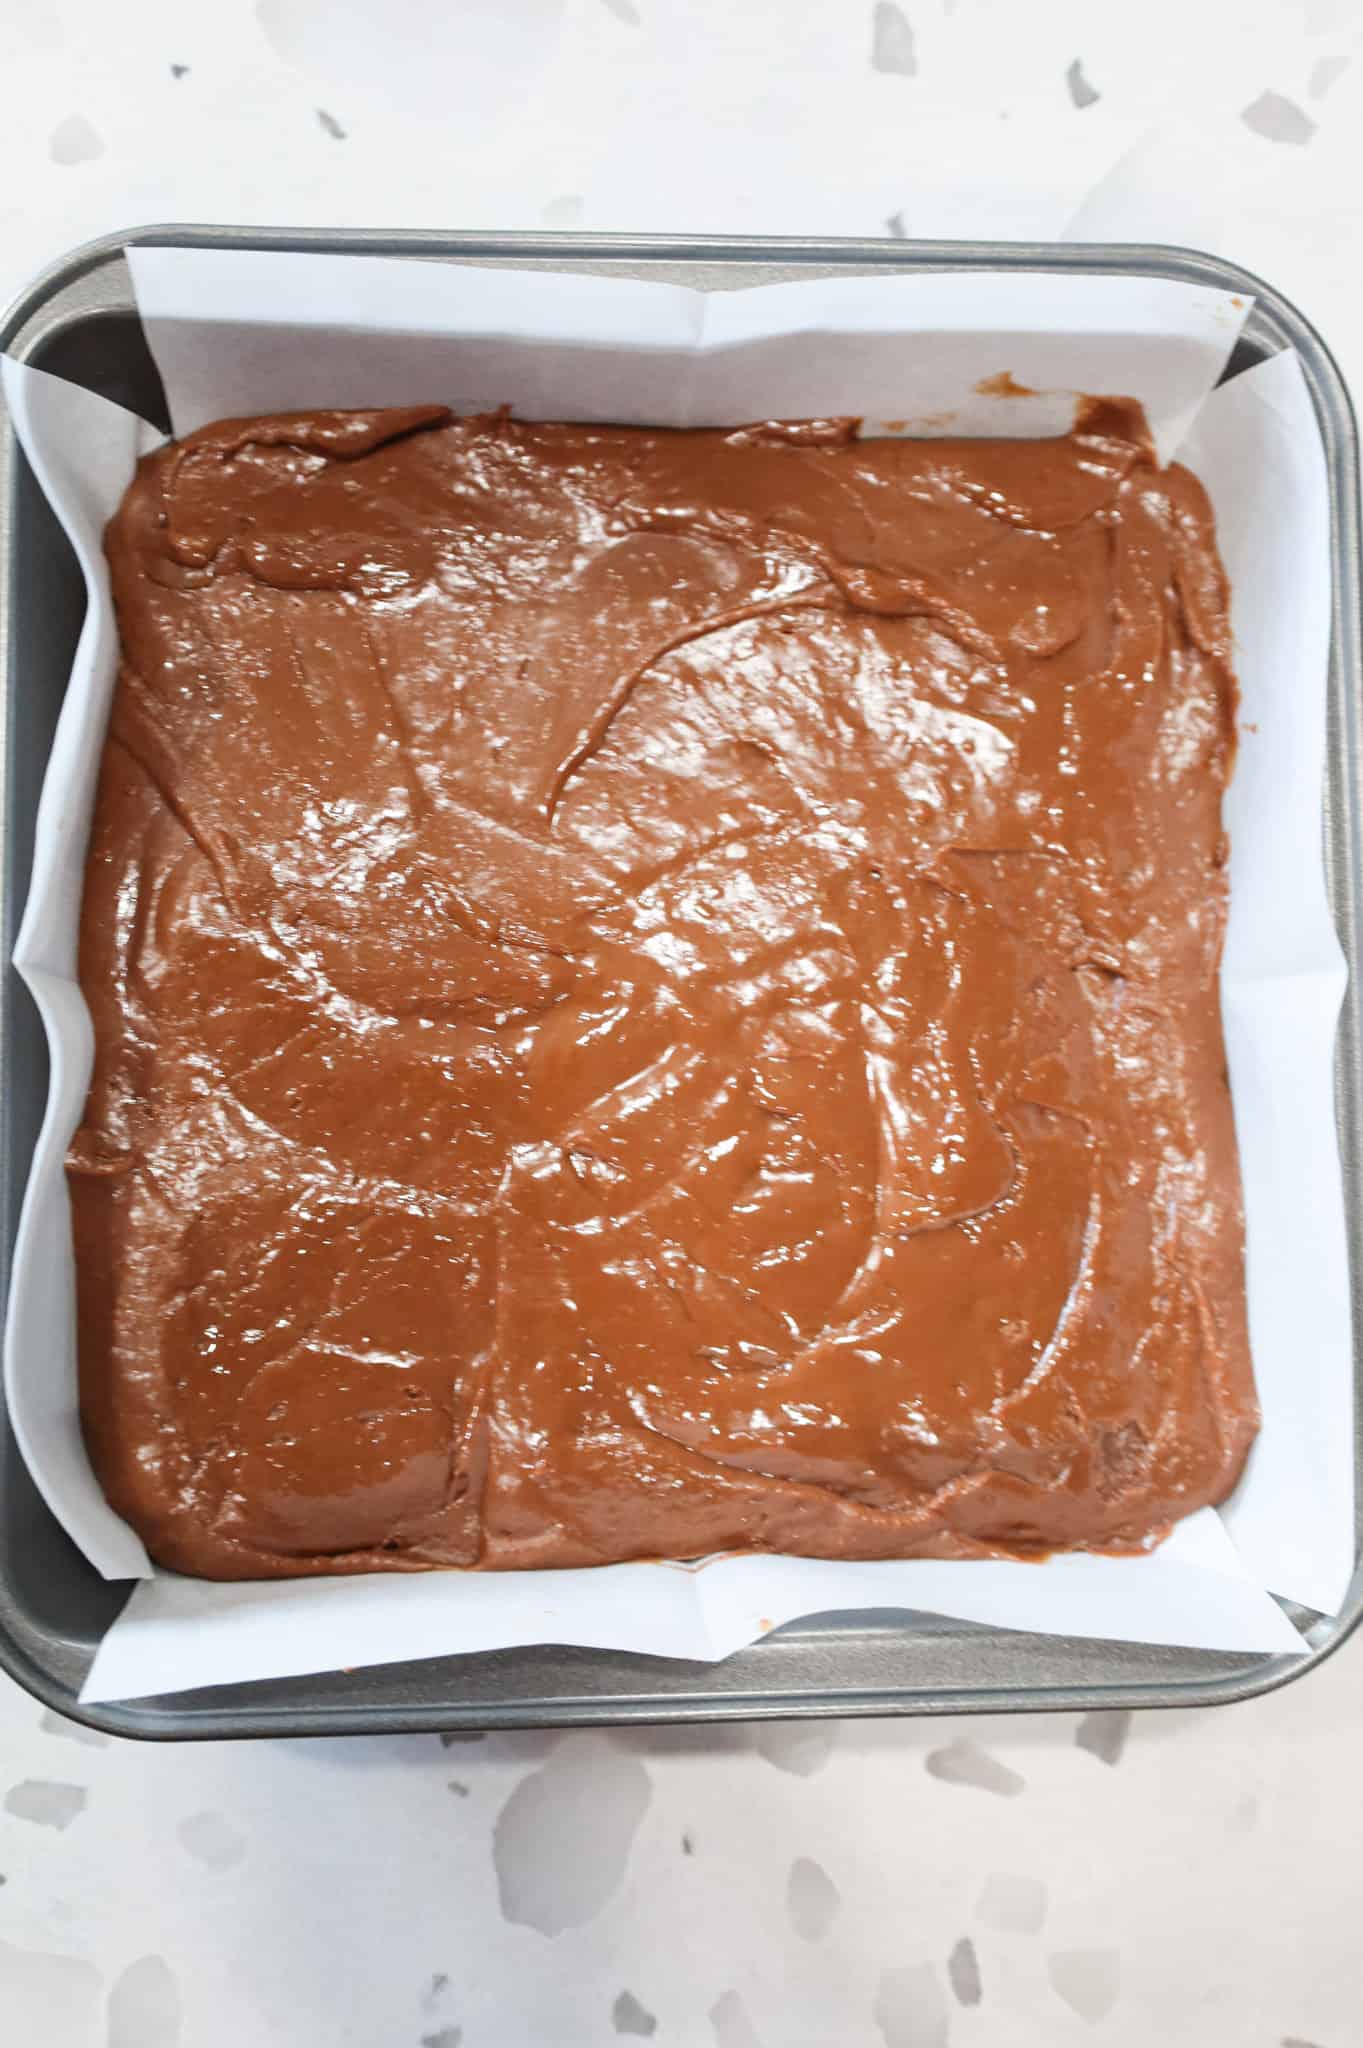 milk chocolate mixture spread in a parchment lined baking pan